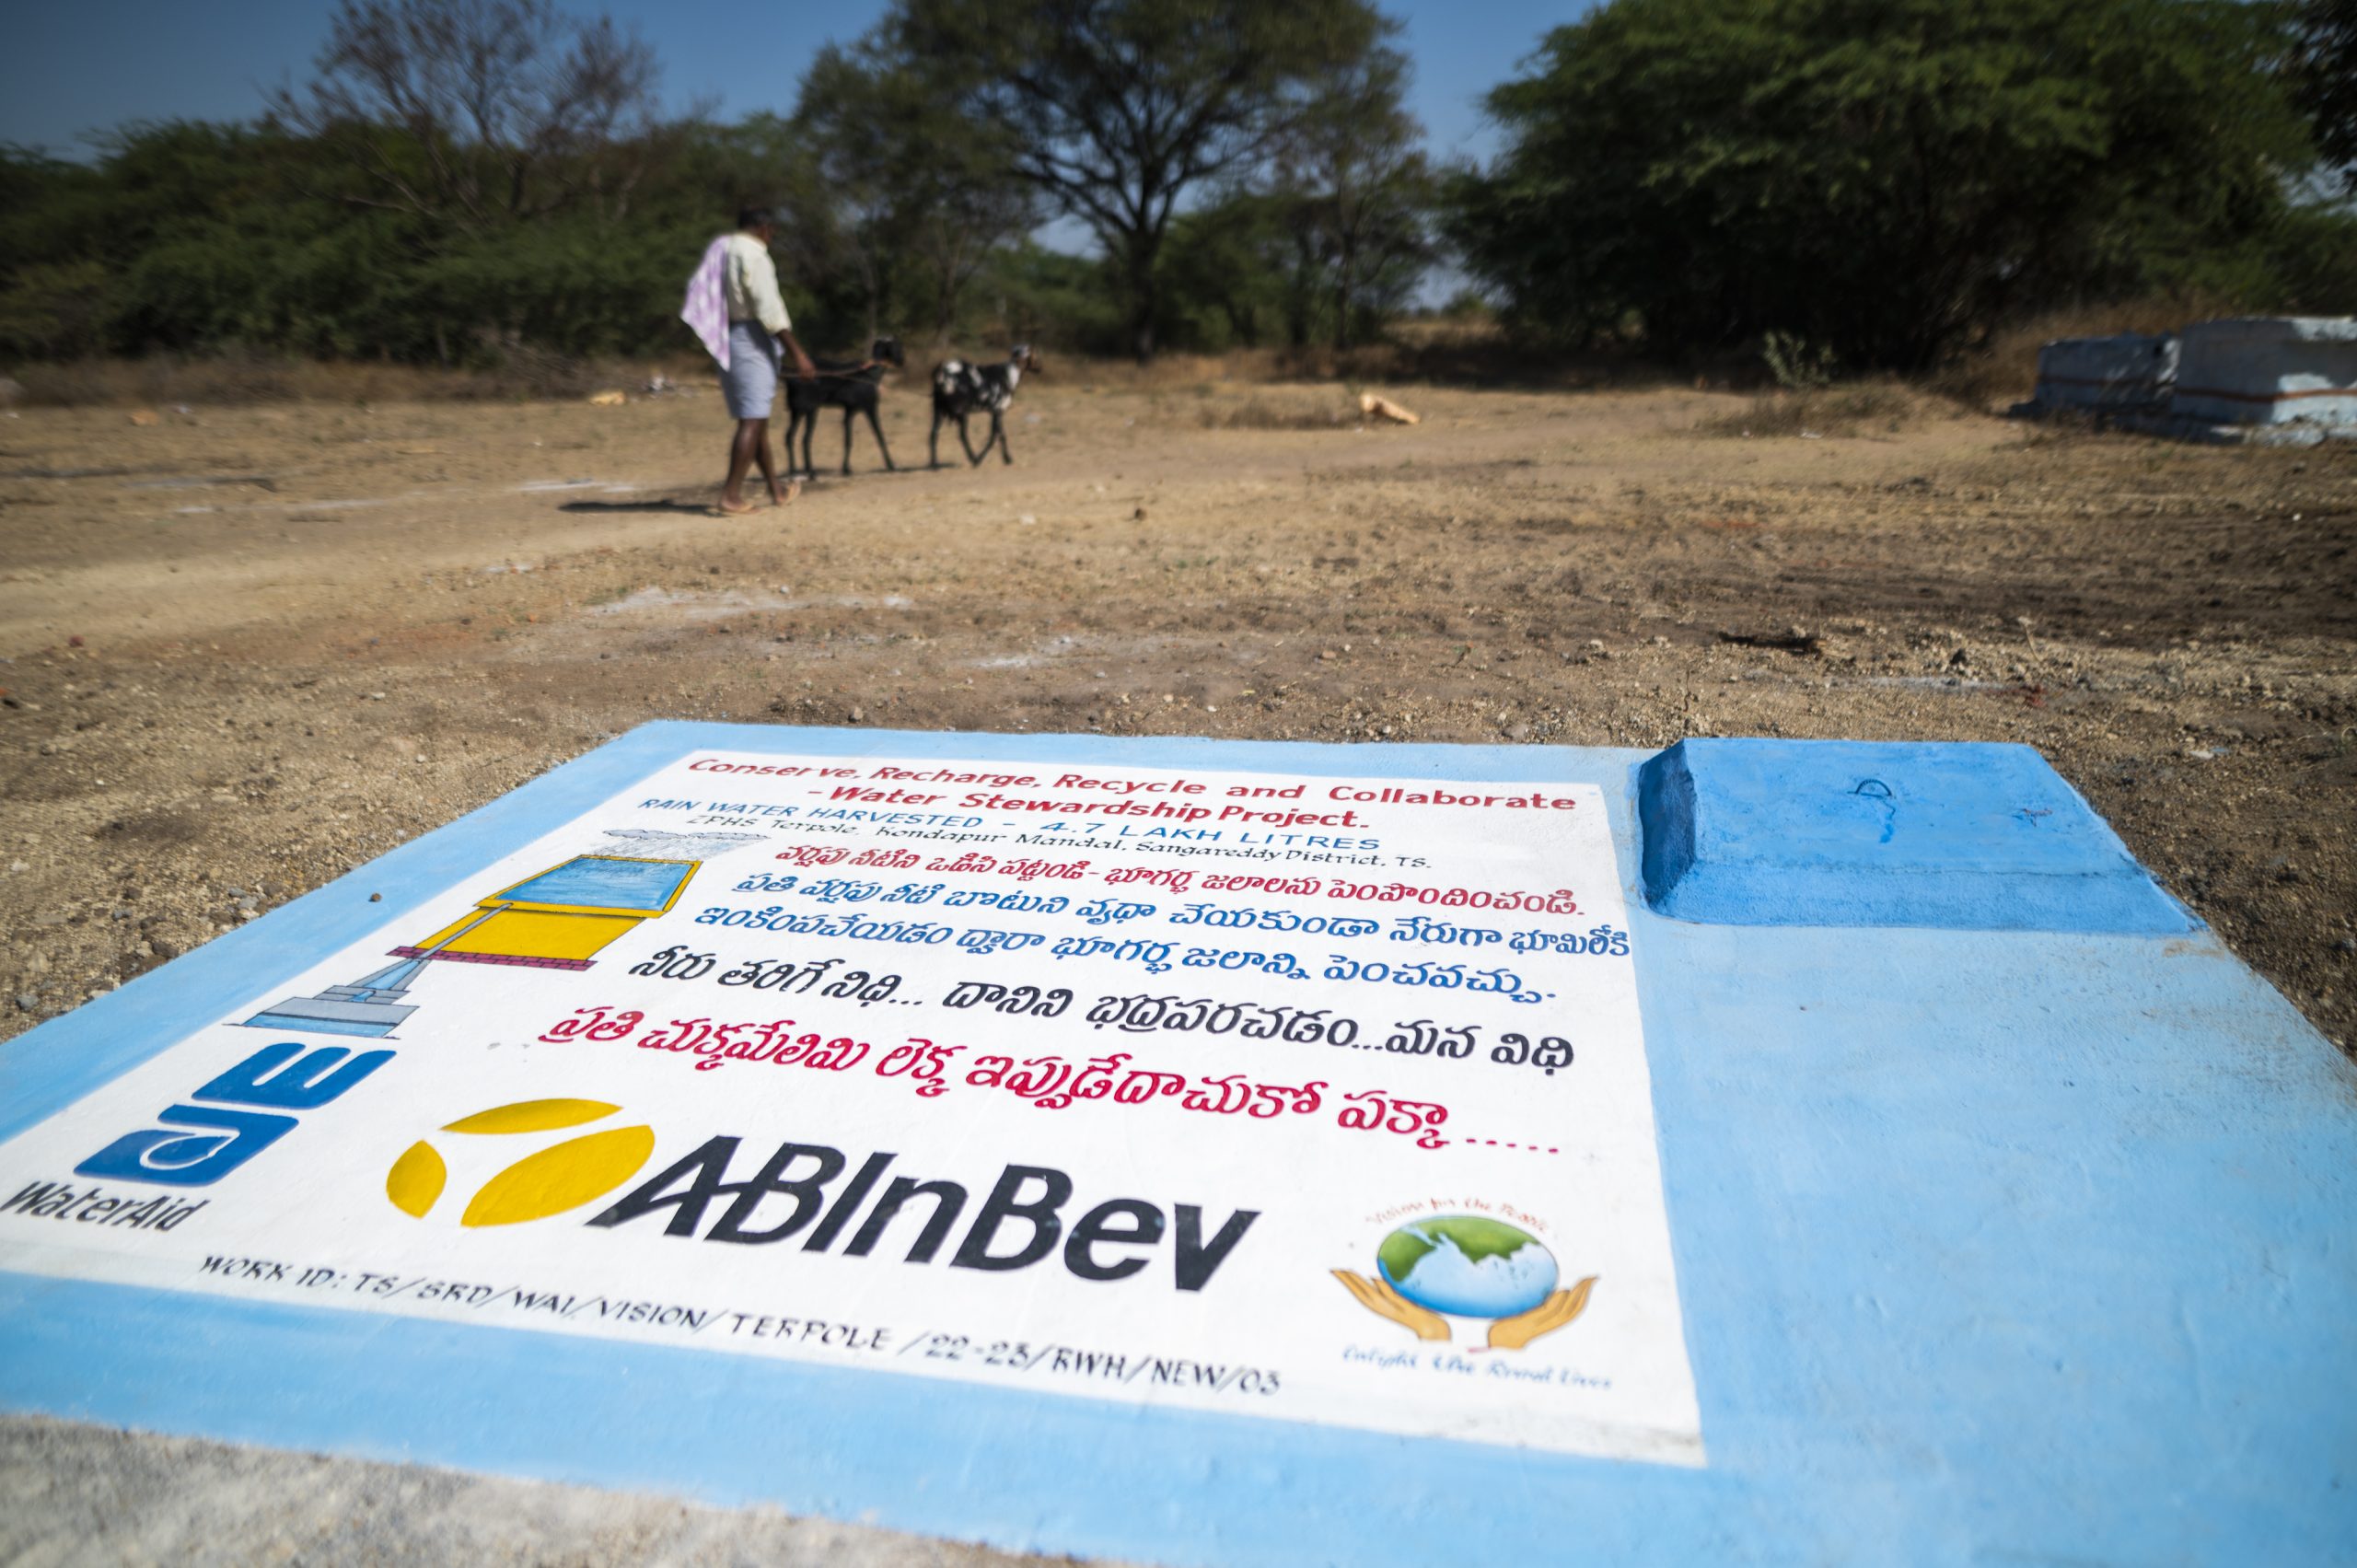 AB InBev India today announced the expansion of its Water Security Program in the country 